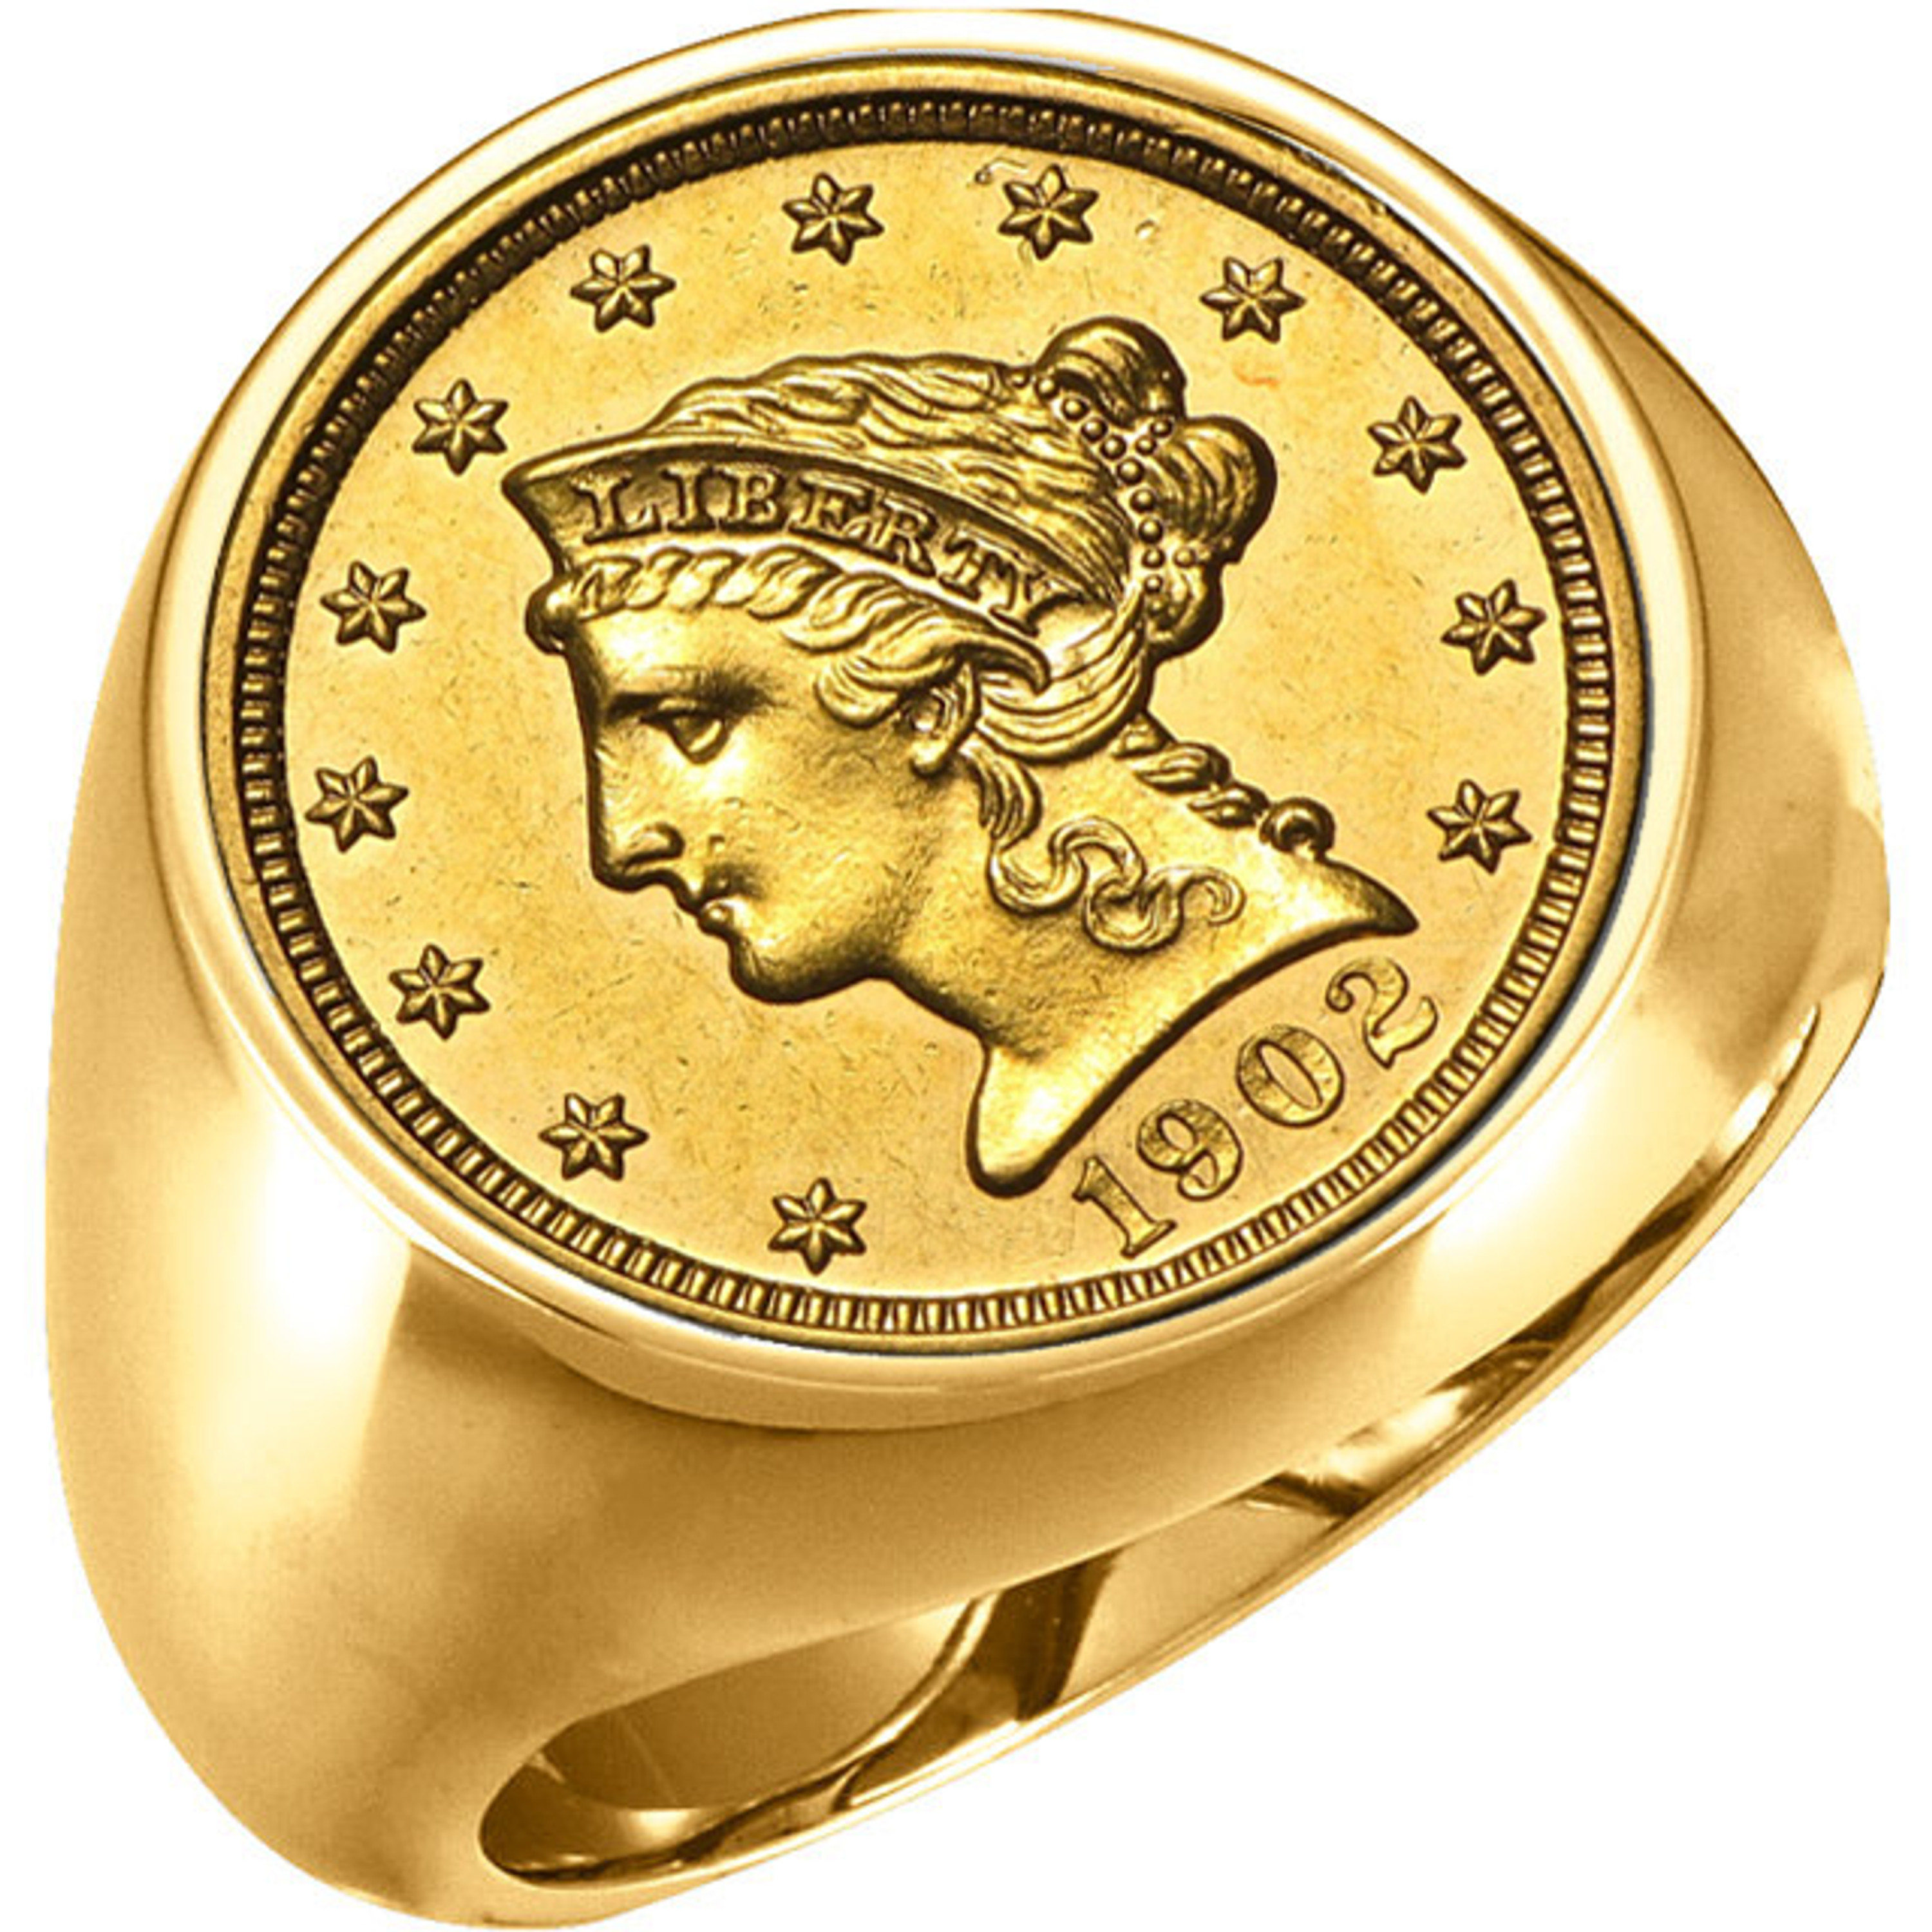 18k Gold Mens 21.00mm Coin Ring With A $2.50 Liberty Head Gold coin